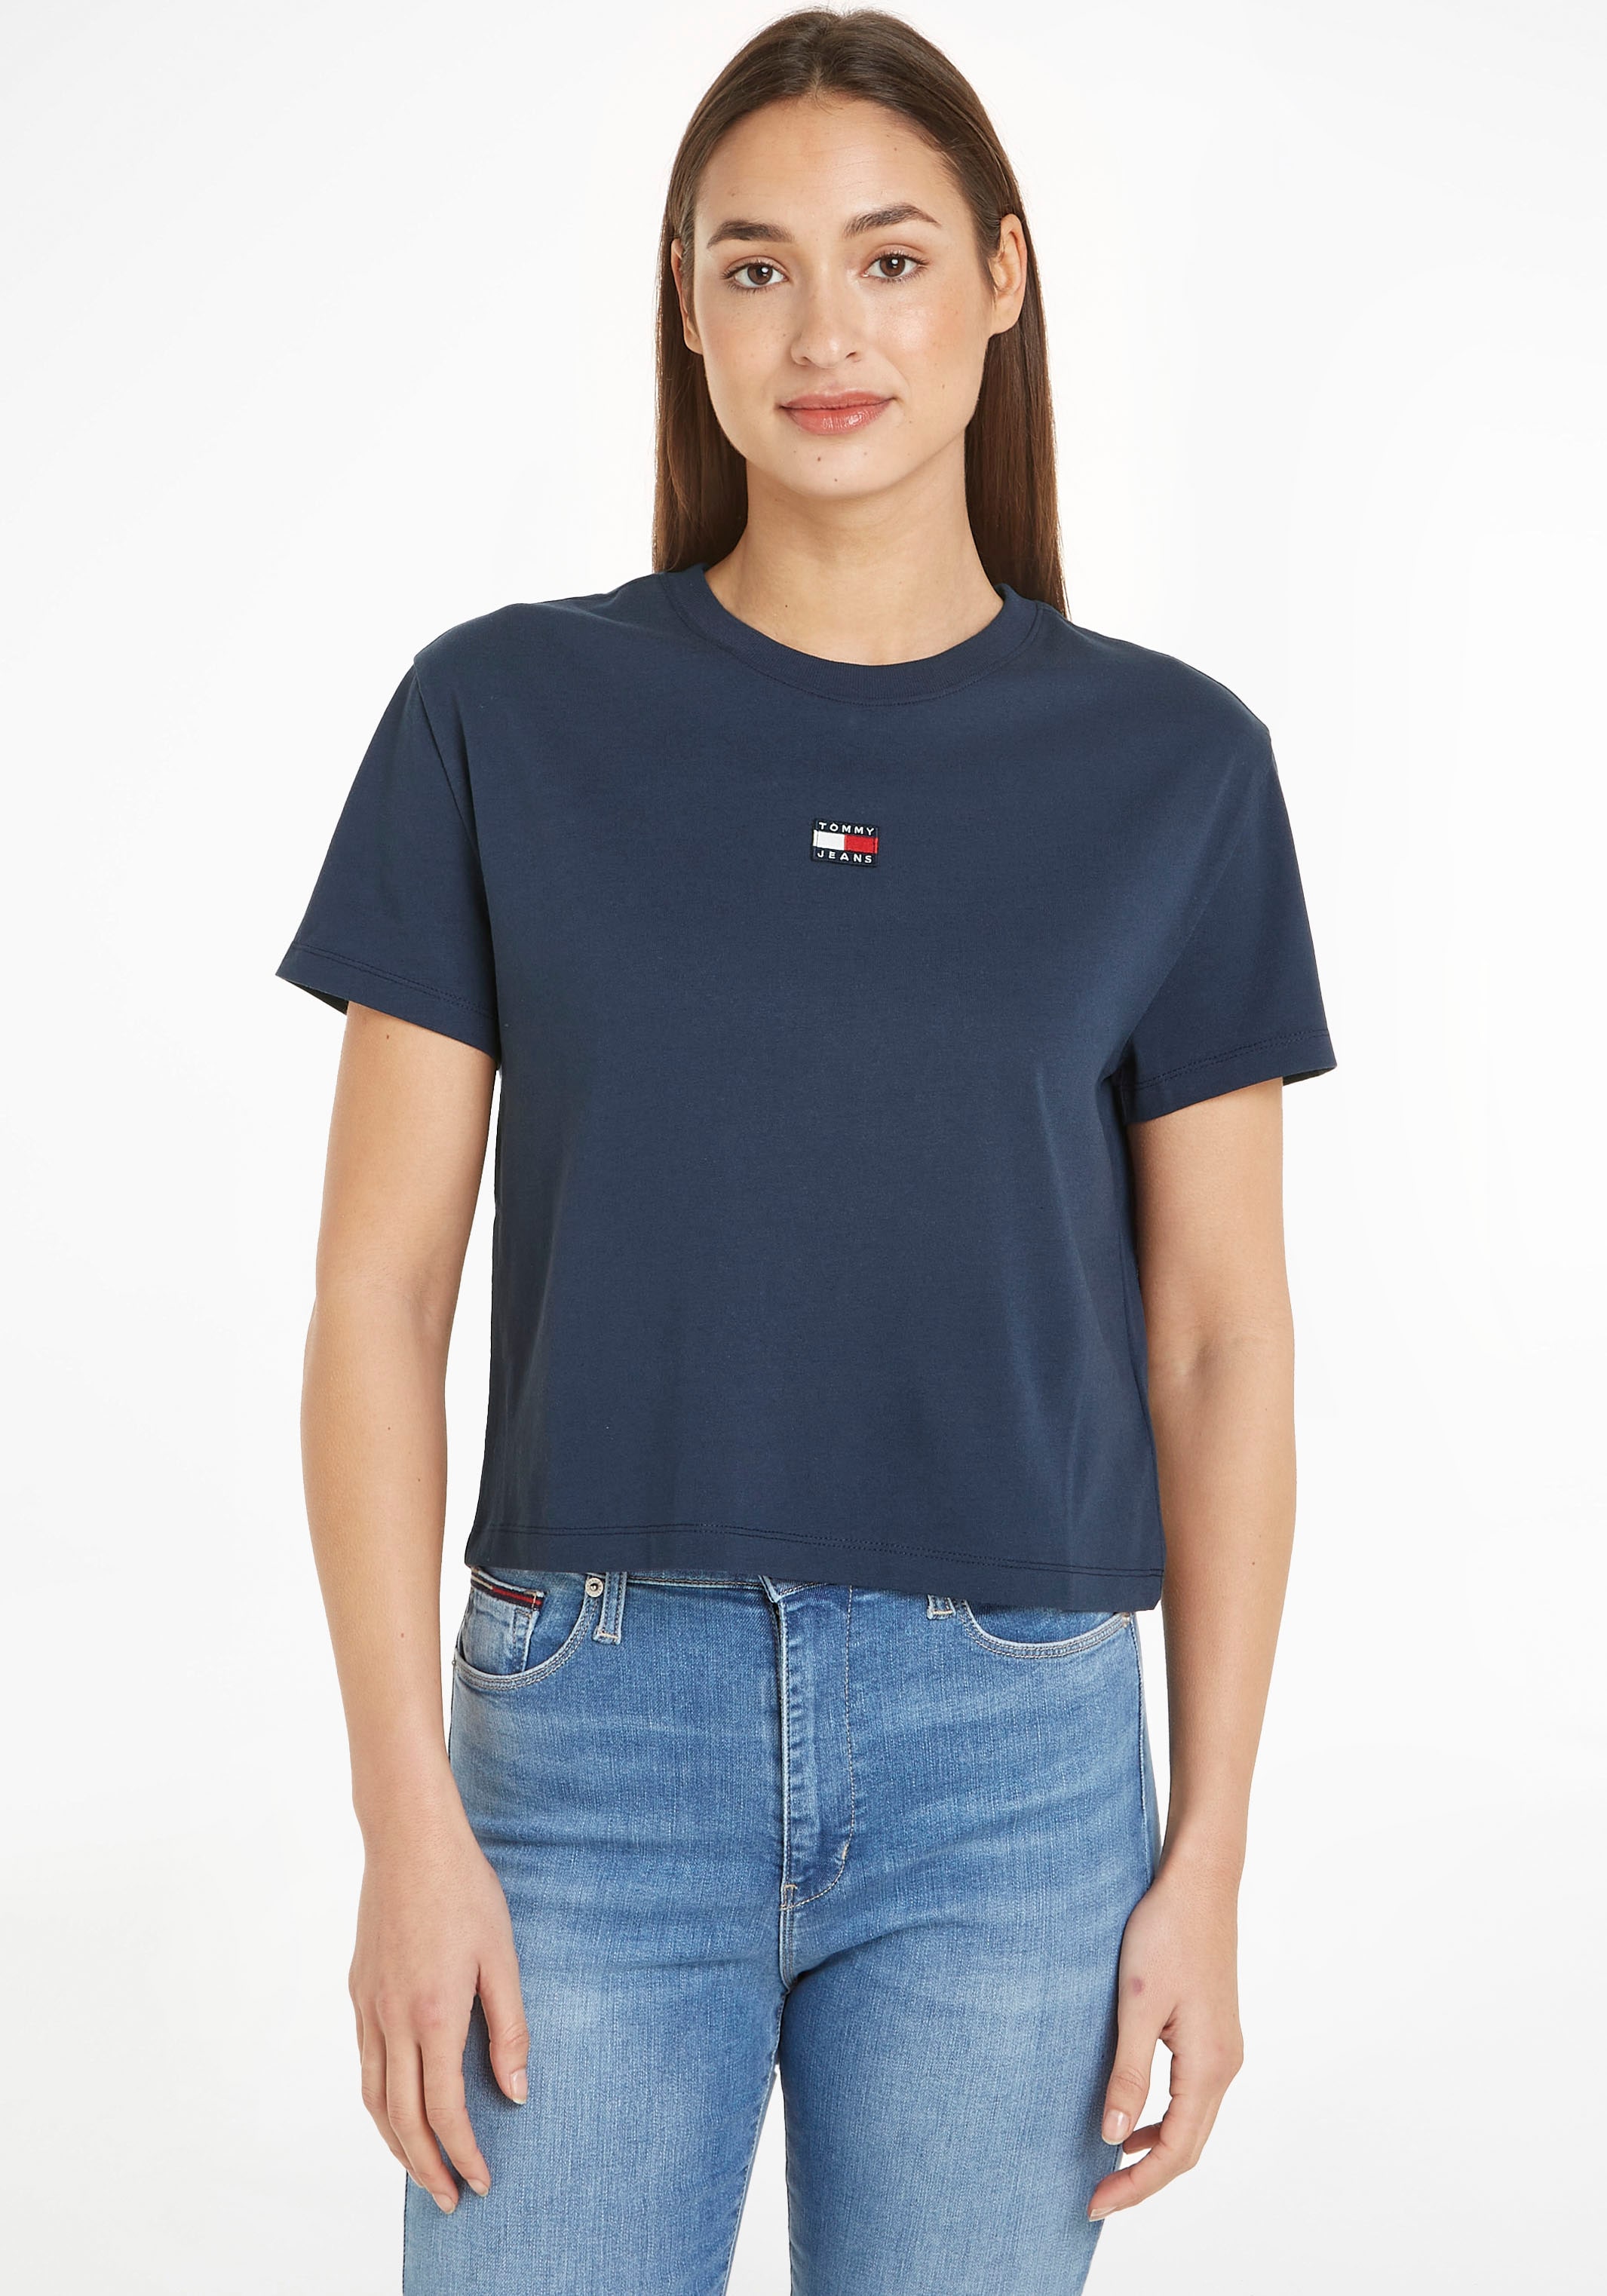 Logostickerei TEE«, Jeans Tommy BADGE CLS XS Online im »TJW Shop Brustkorb am OTTO mit Tommy Jeans T-Shirt